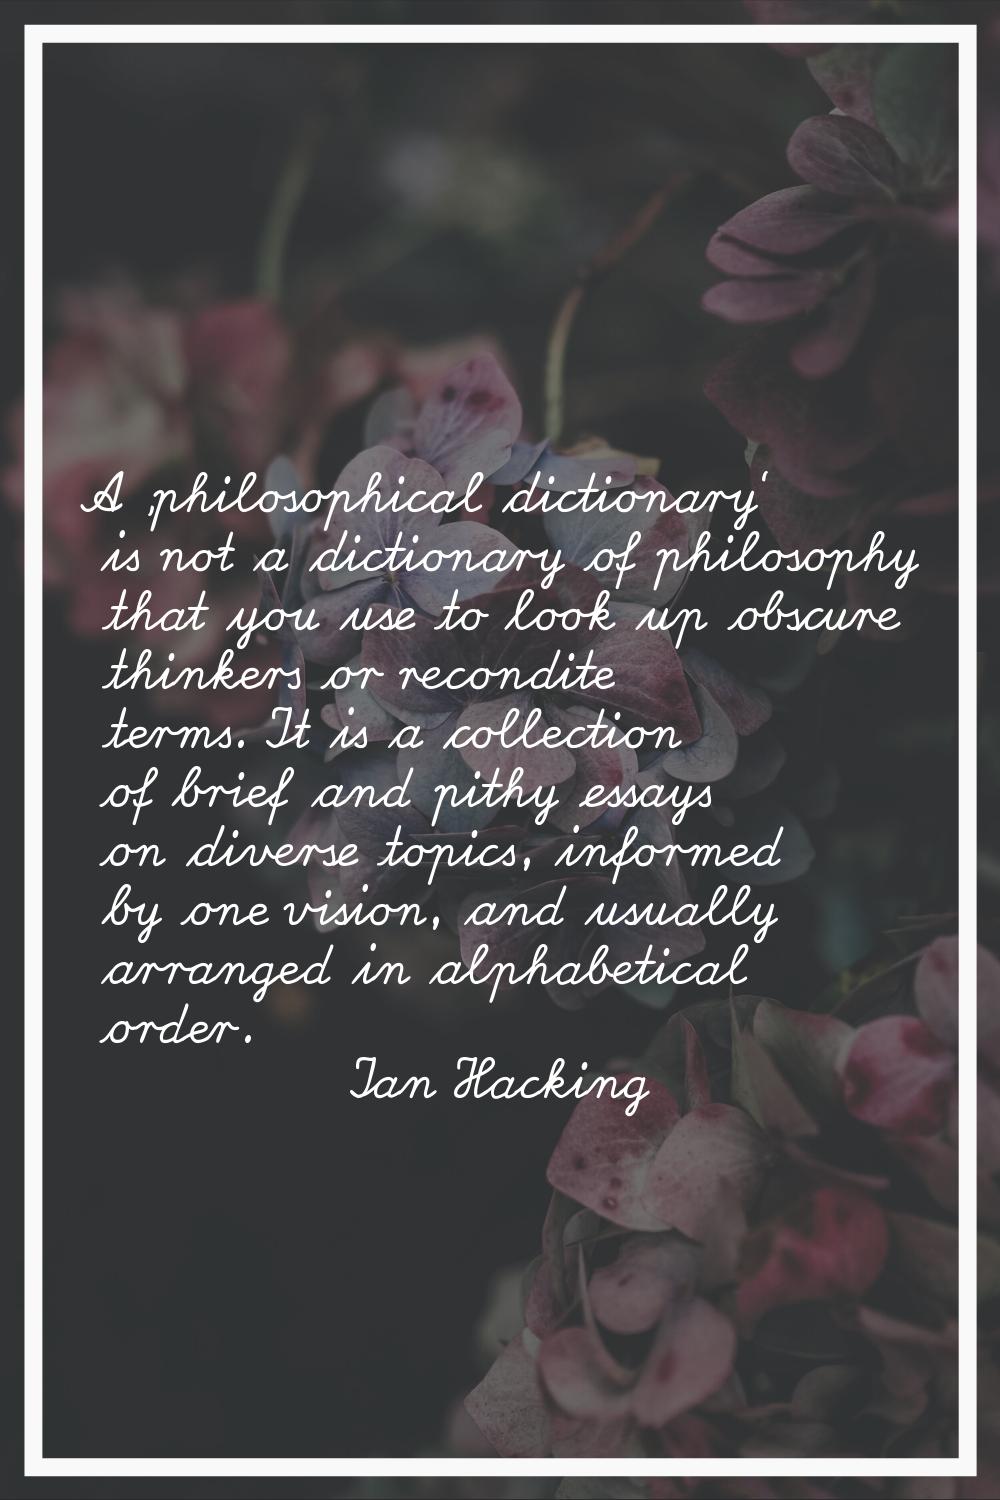 A 'philosophical dictionary' is not a dictionary of philosophy that you use to look up obscure thin